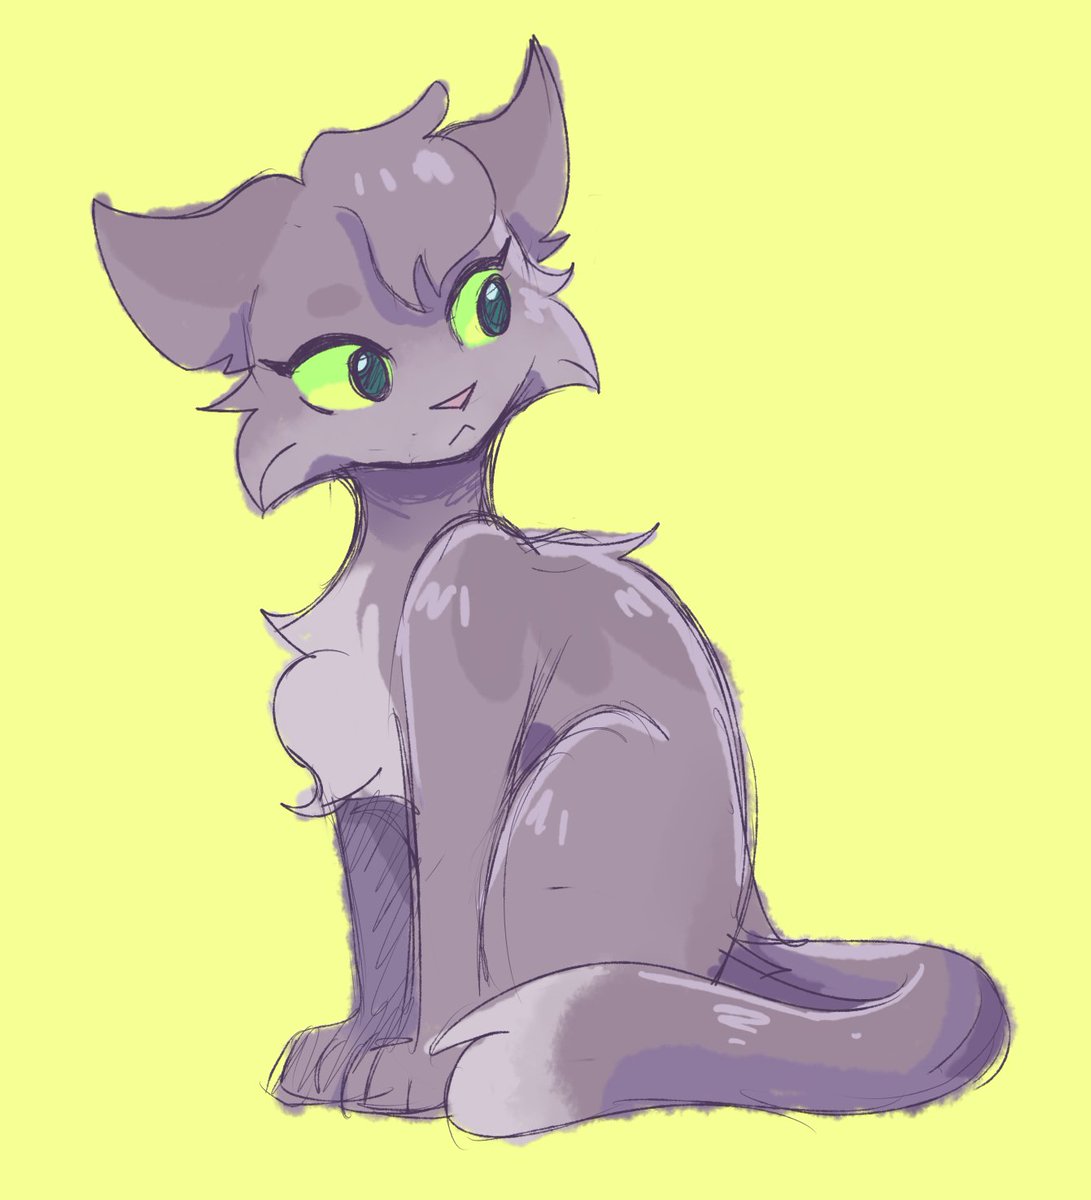 this sketch I made of dovewing continues being so pretty ven though it's SO simple